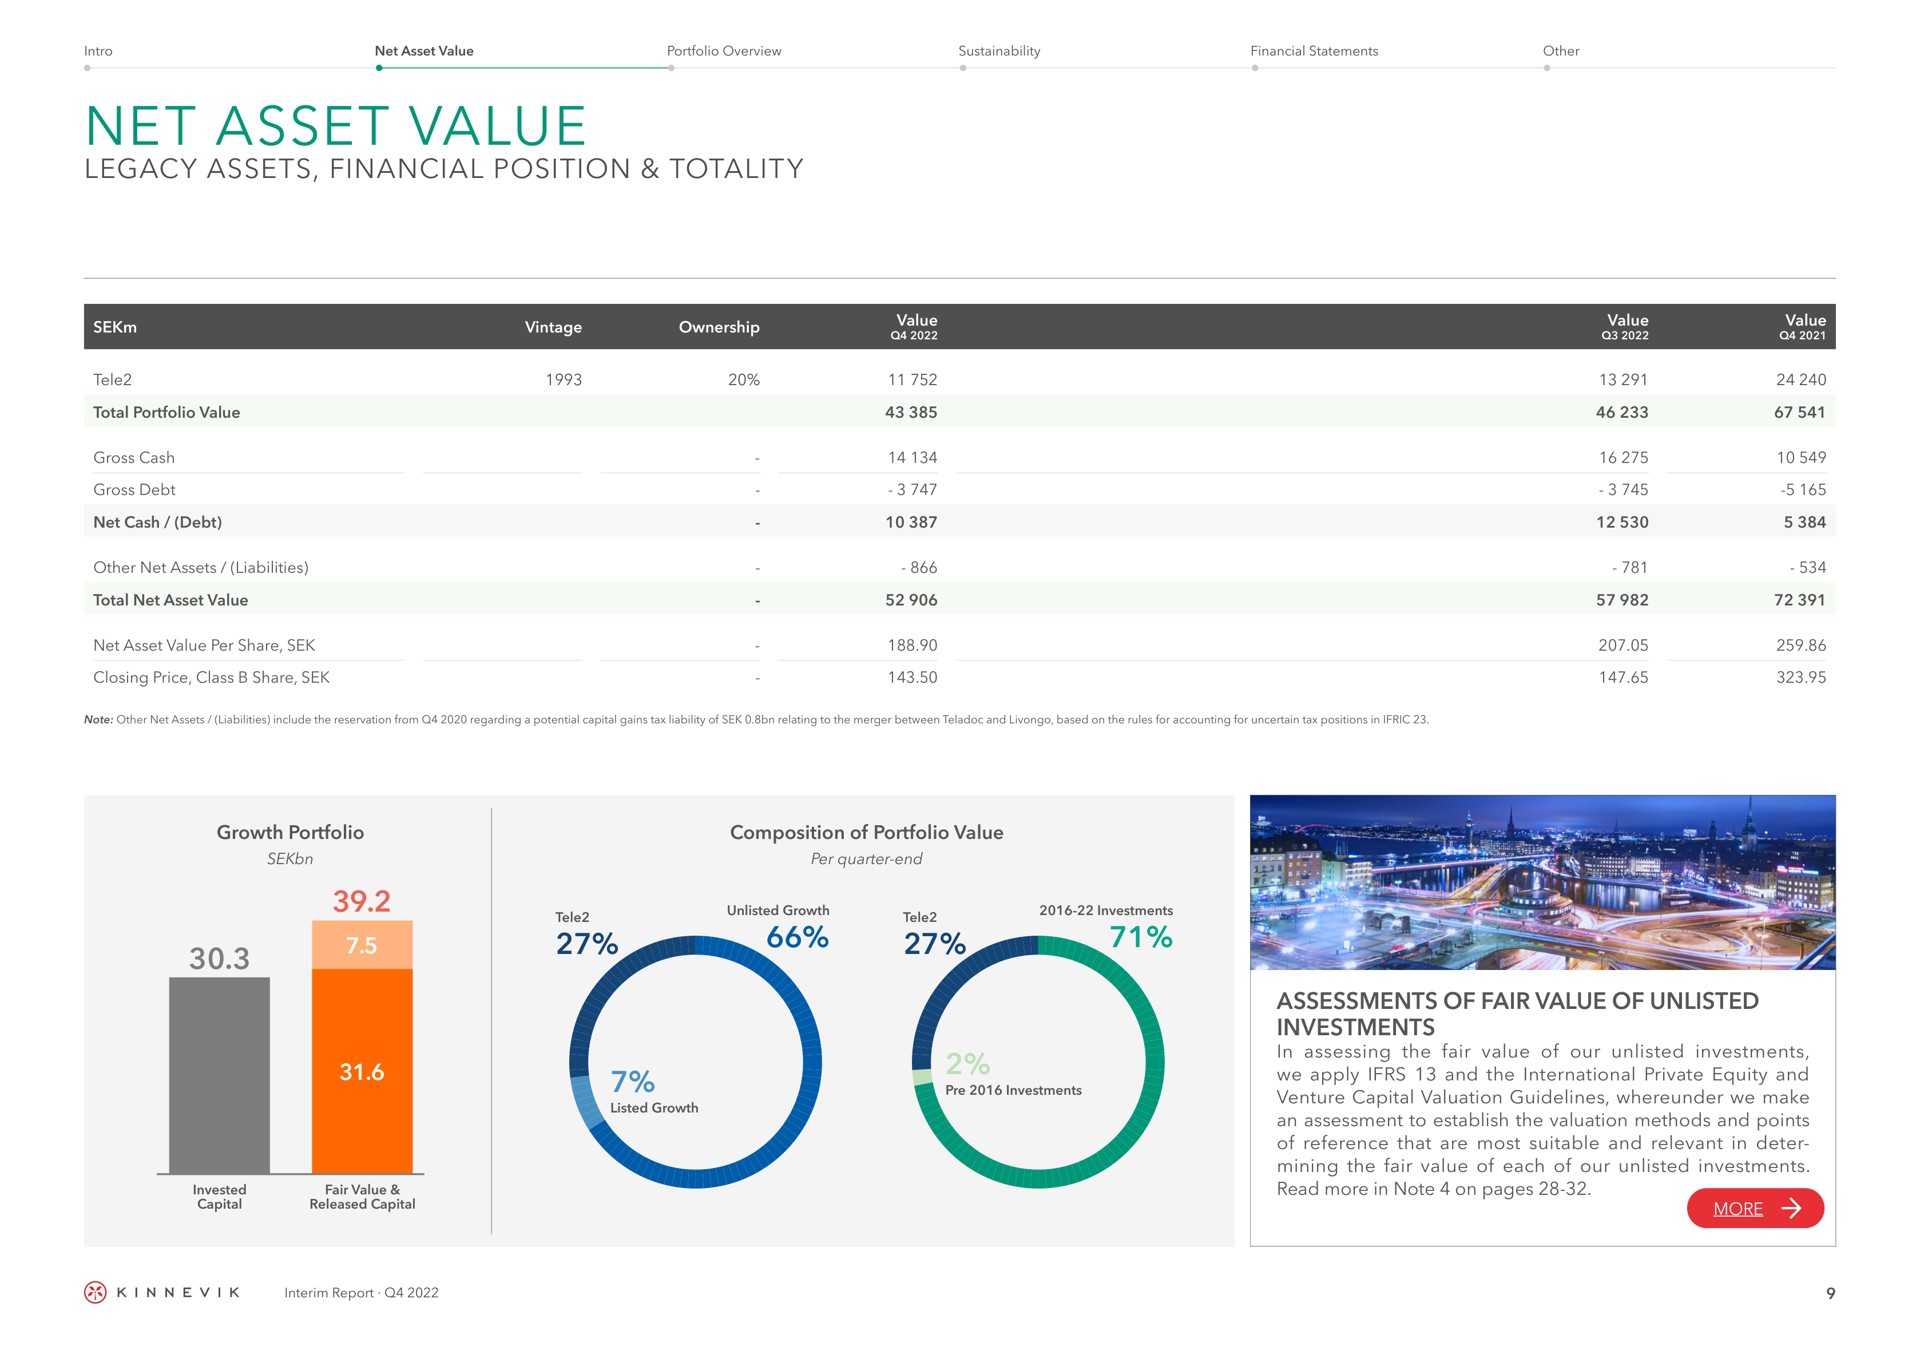 net asset value legacy assets financial position assessments of fair value of unlisted investments totality cee say wae growth portfolio composition portfolio an assessment to establish the valuation methods and points mining the each our interim report | Kinnevik